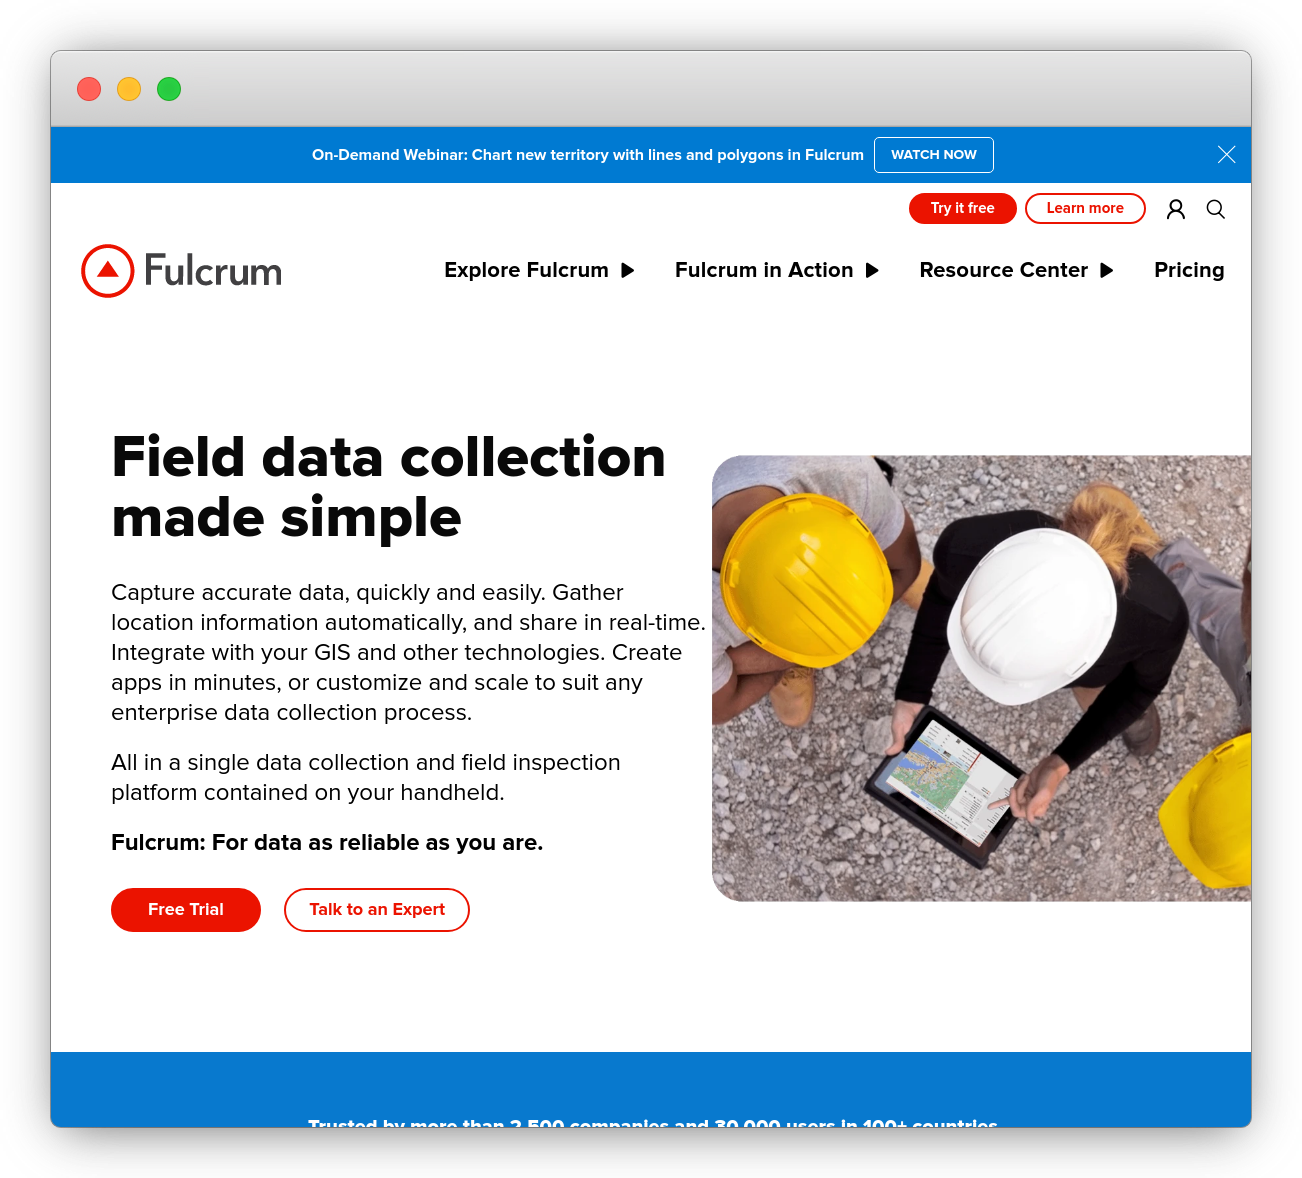 https://www.zonkafeedback.com/hs-fs/hubfs/Fulcrum-Data%20collection%20tool.png?width=1302&height=1178&name=Fulcrum-Data%20collection%20tool.png